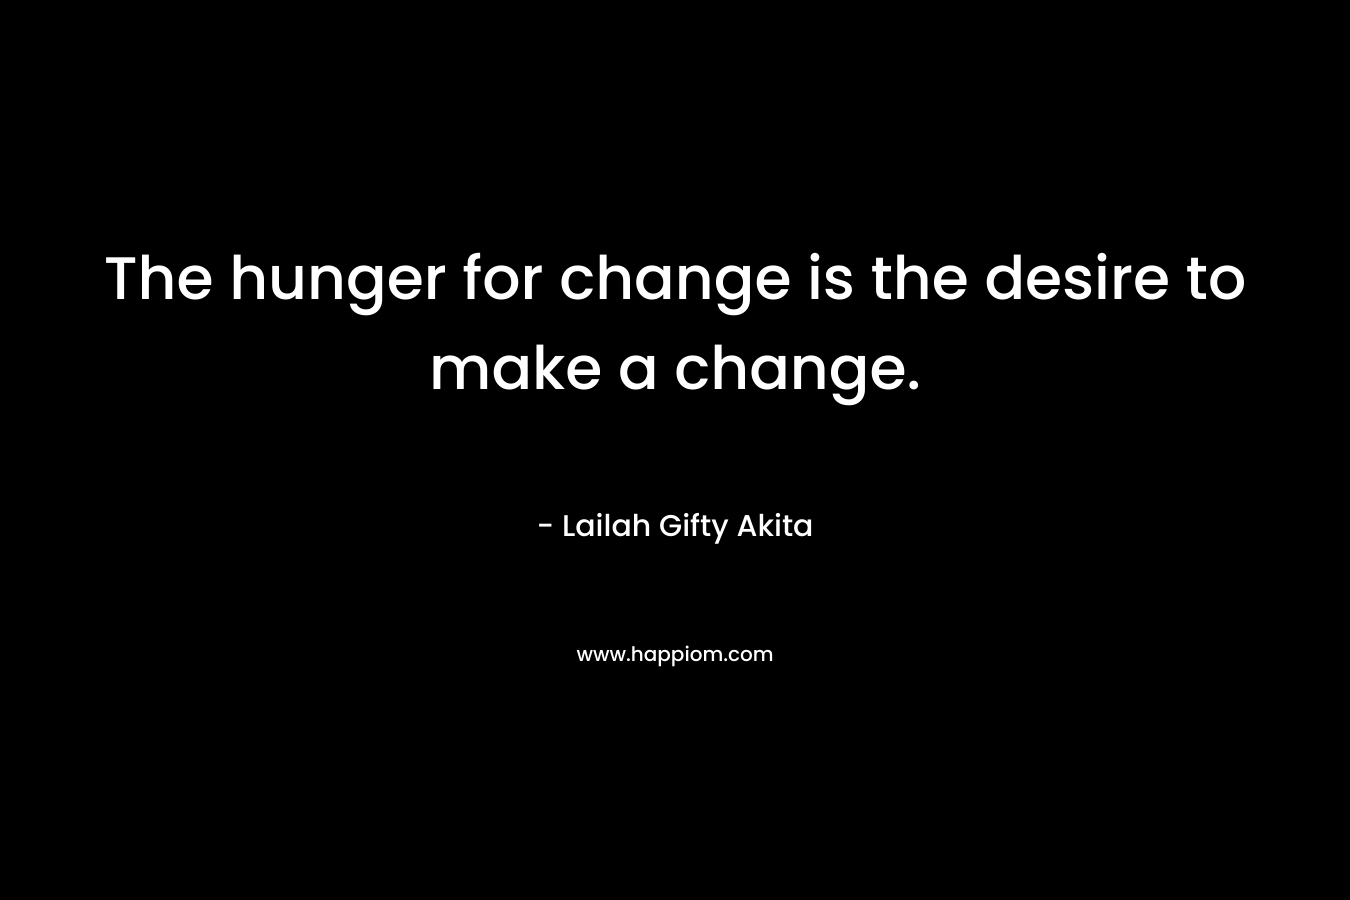 The hunger for change is the desire to make a change.